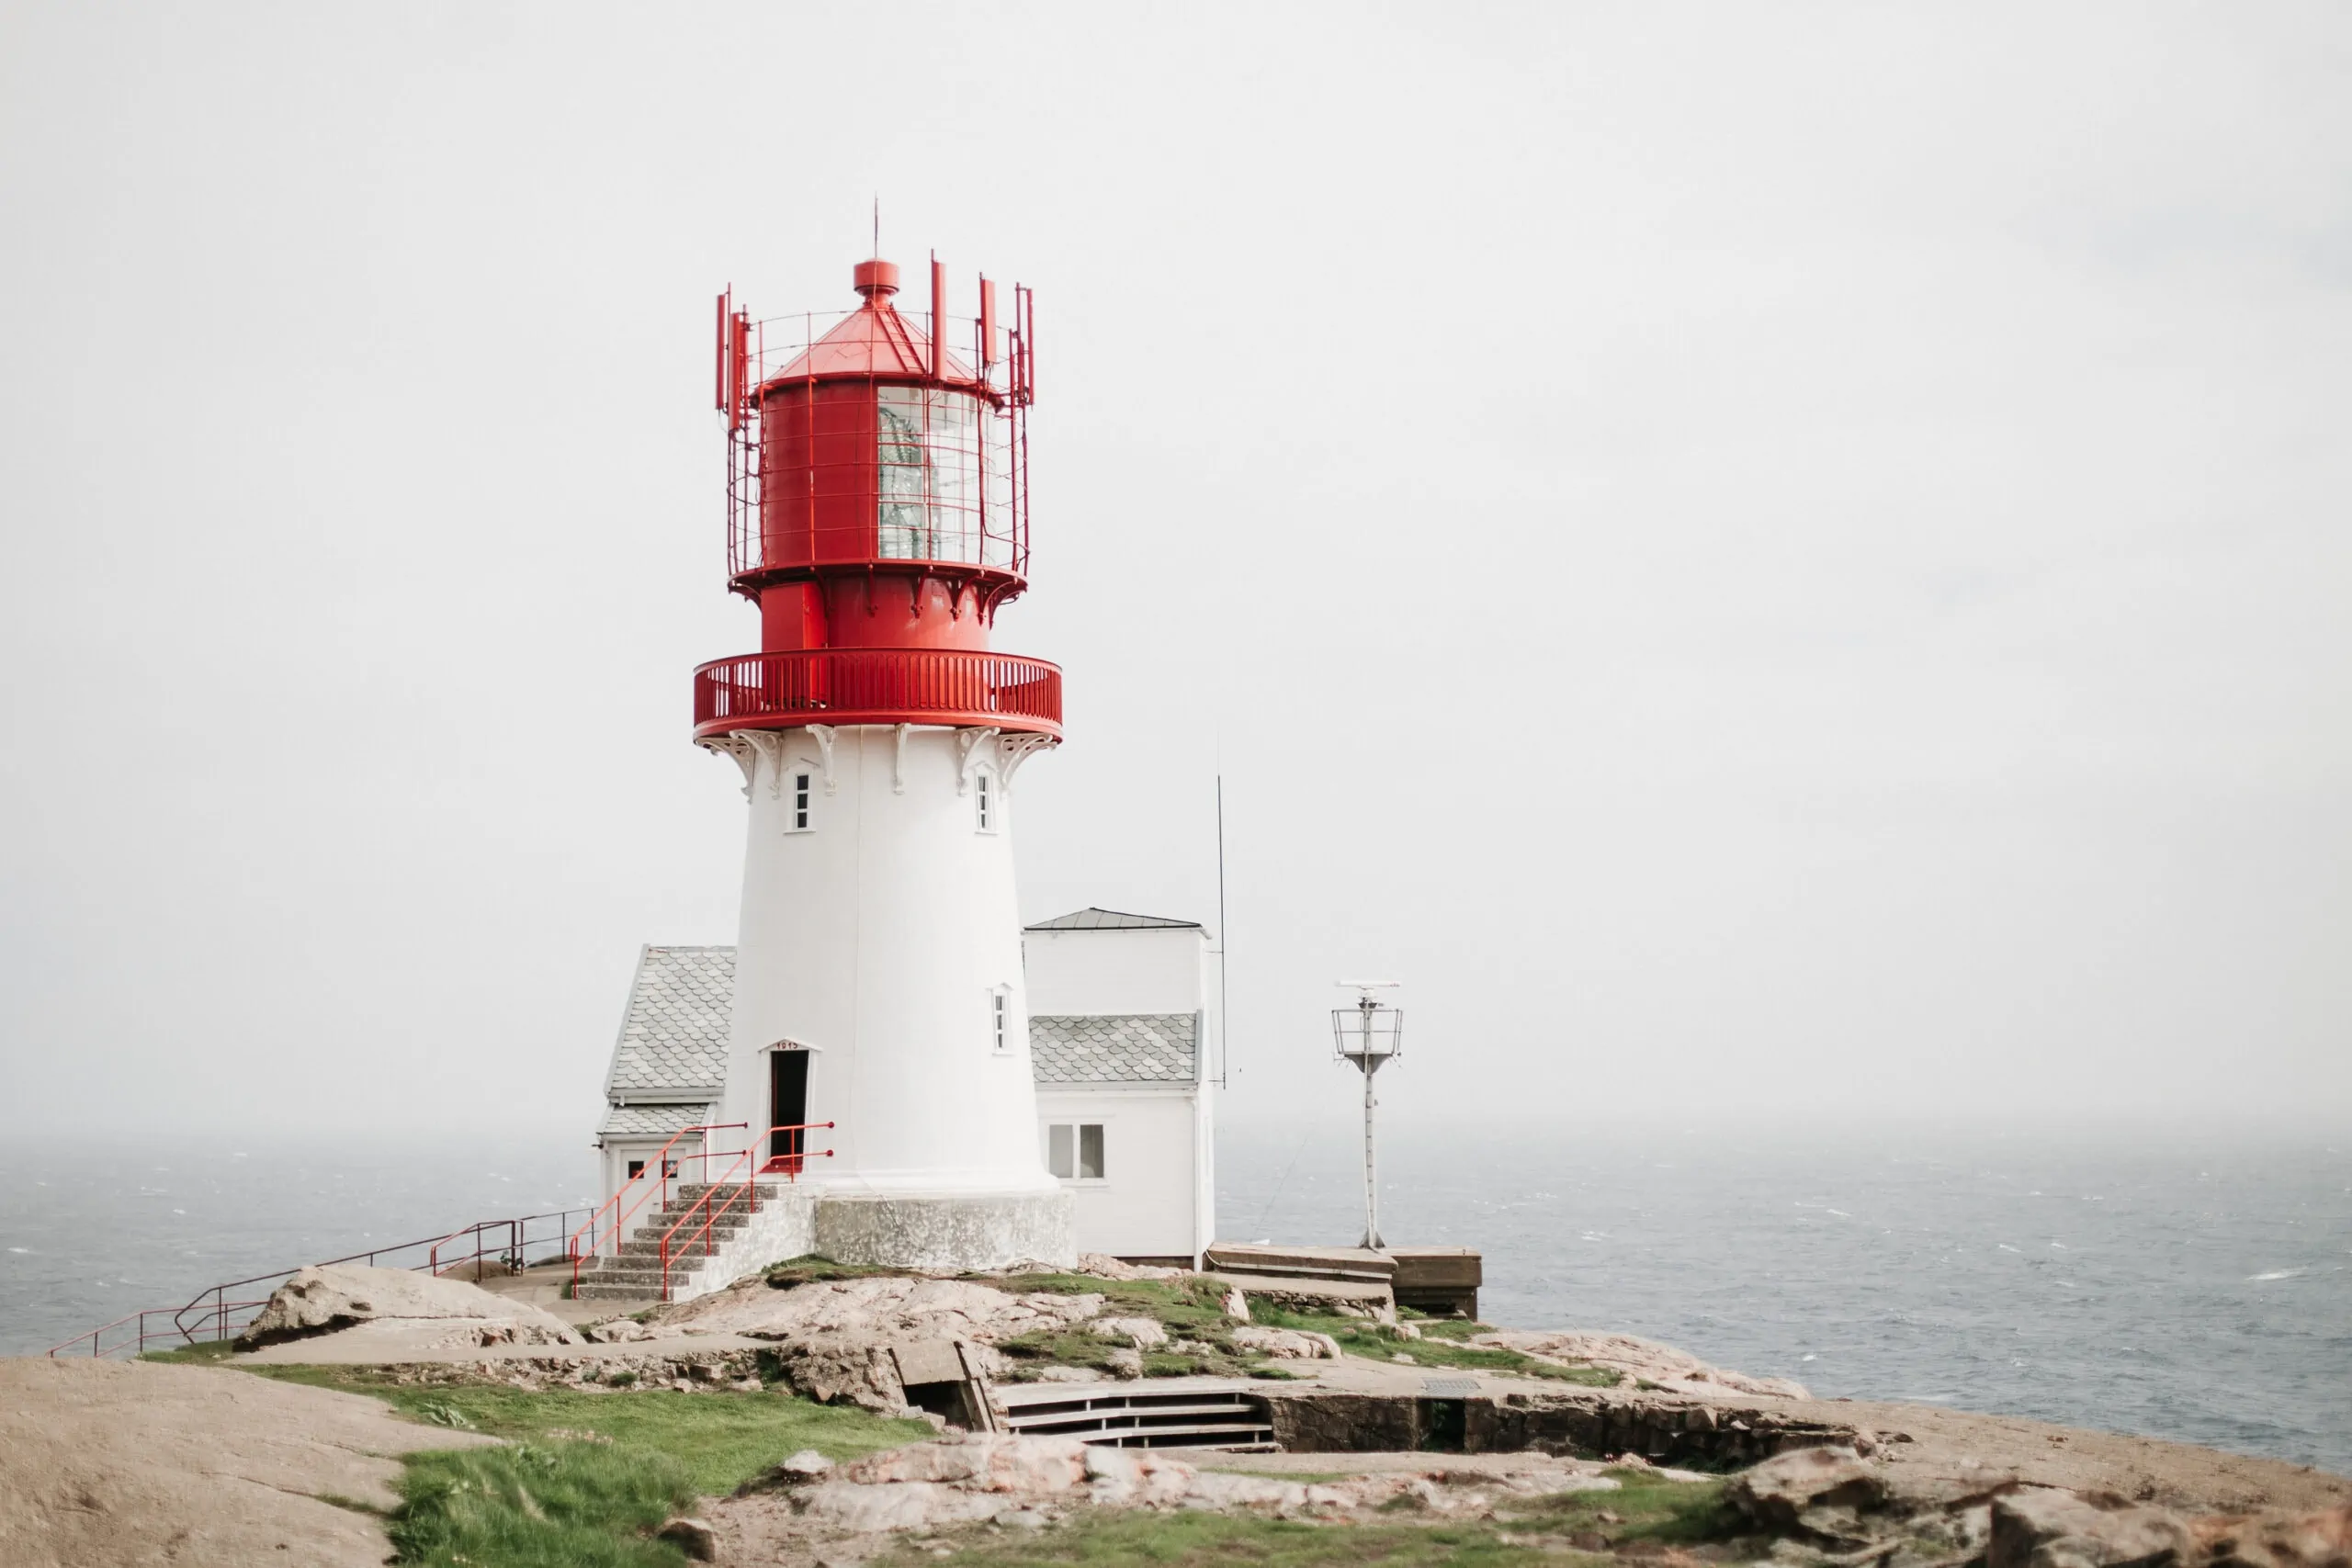 Lindesnes Lighthouse in Norway